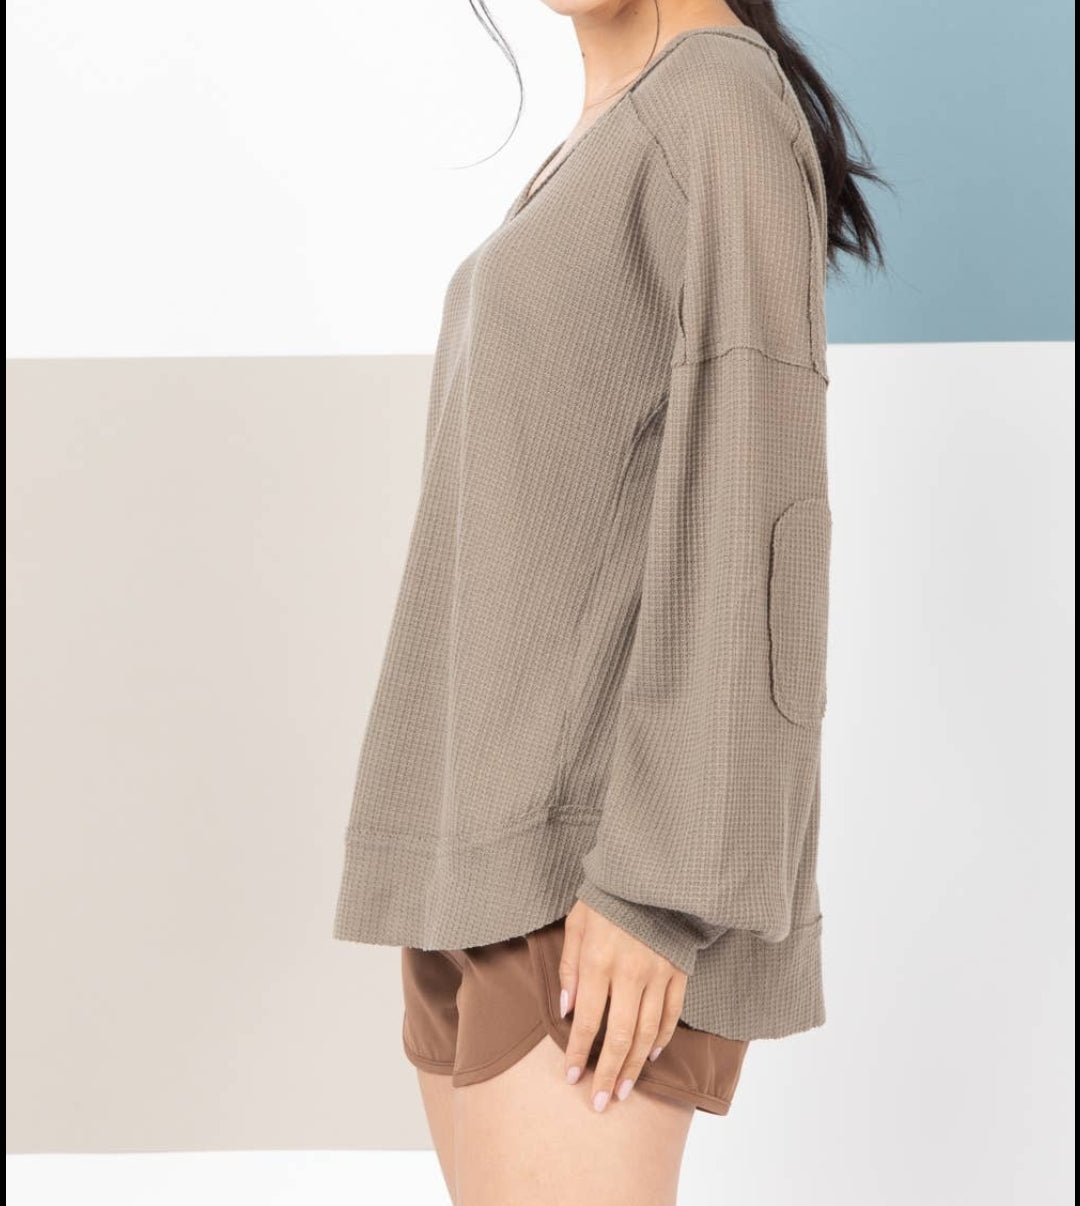 Lt. Olive Thermal Knit Top with Long Sleeves